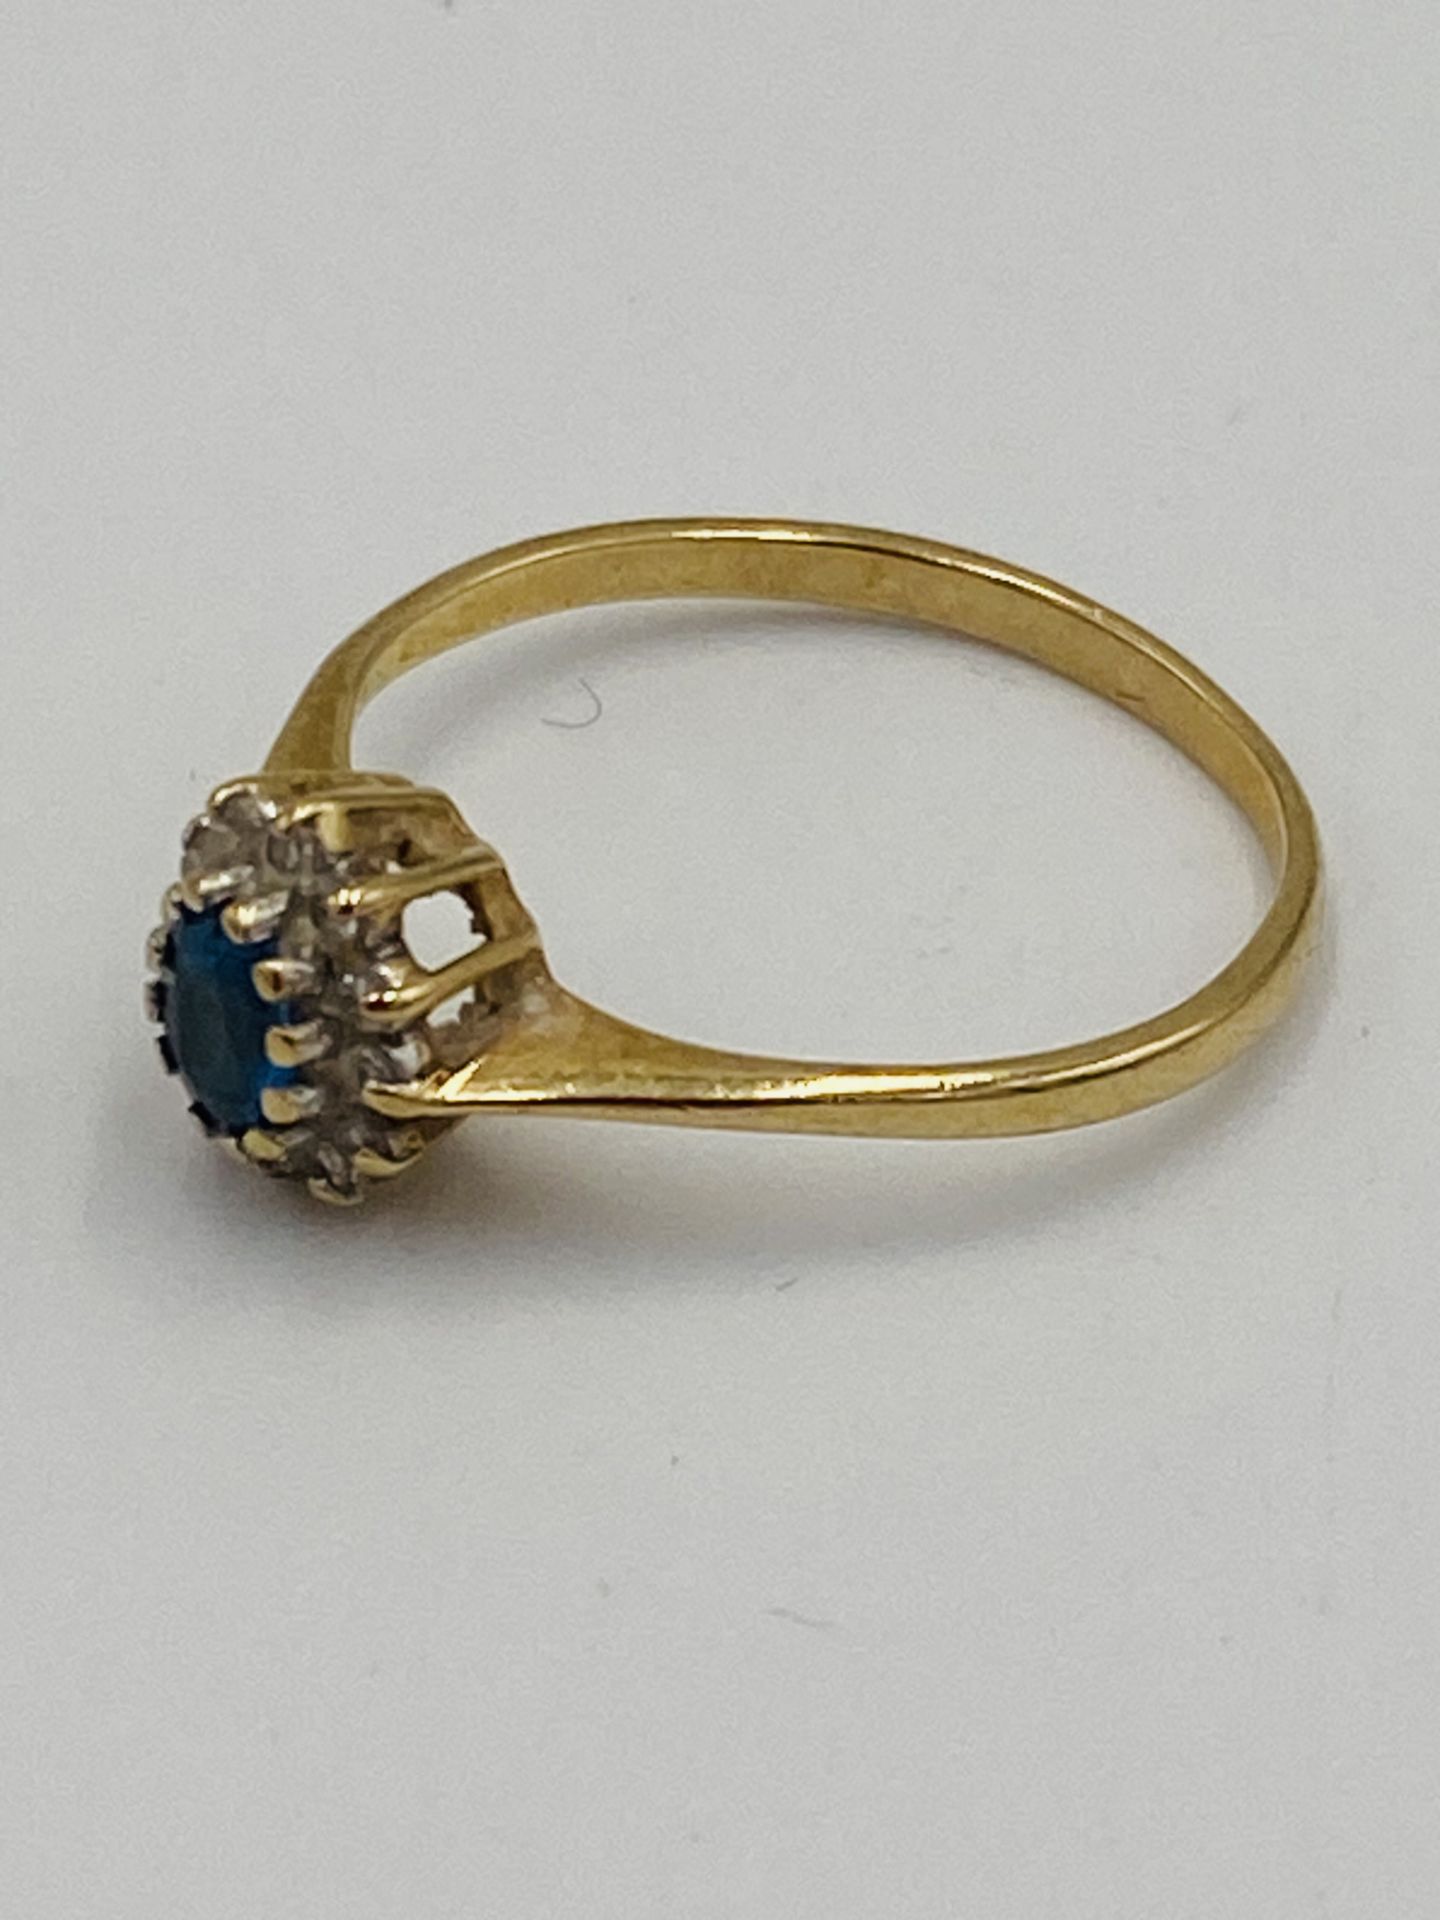 9ct gold ring set with a blue stone - Image 2 of 4